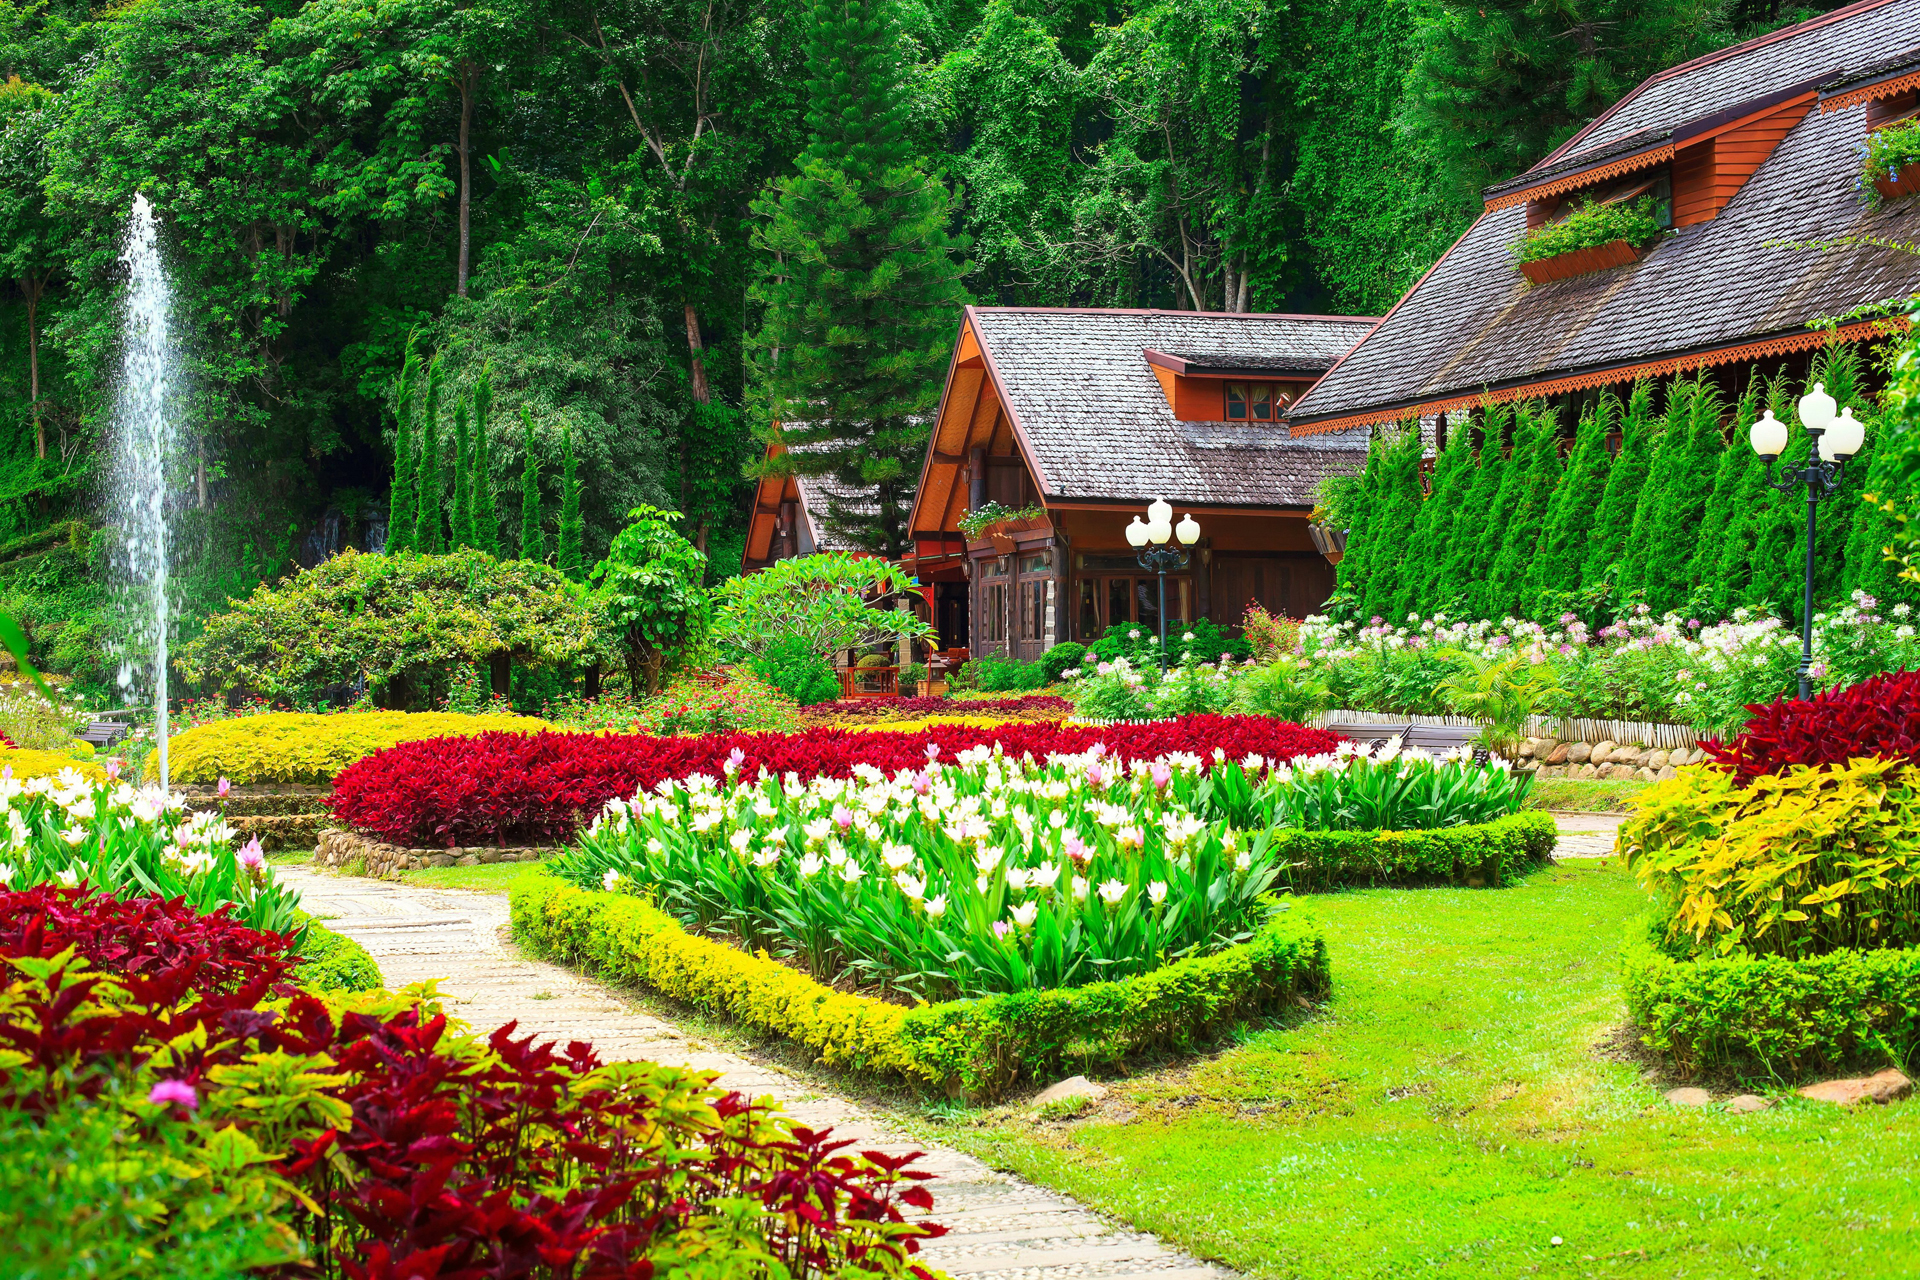 house, man made, garden, colorful, colors, flower, fountain, tree